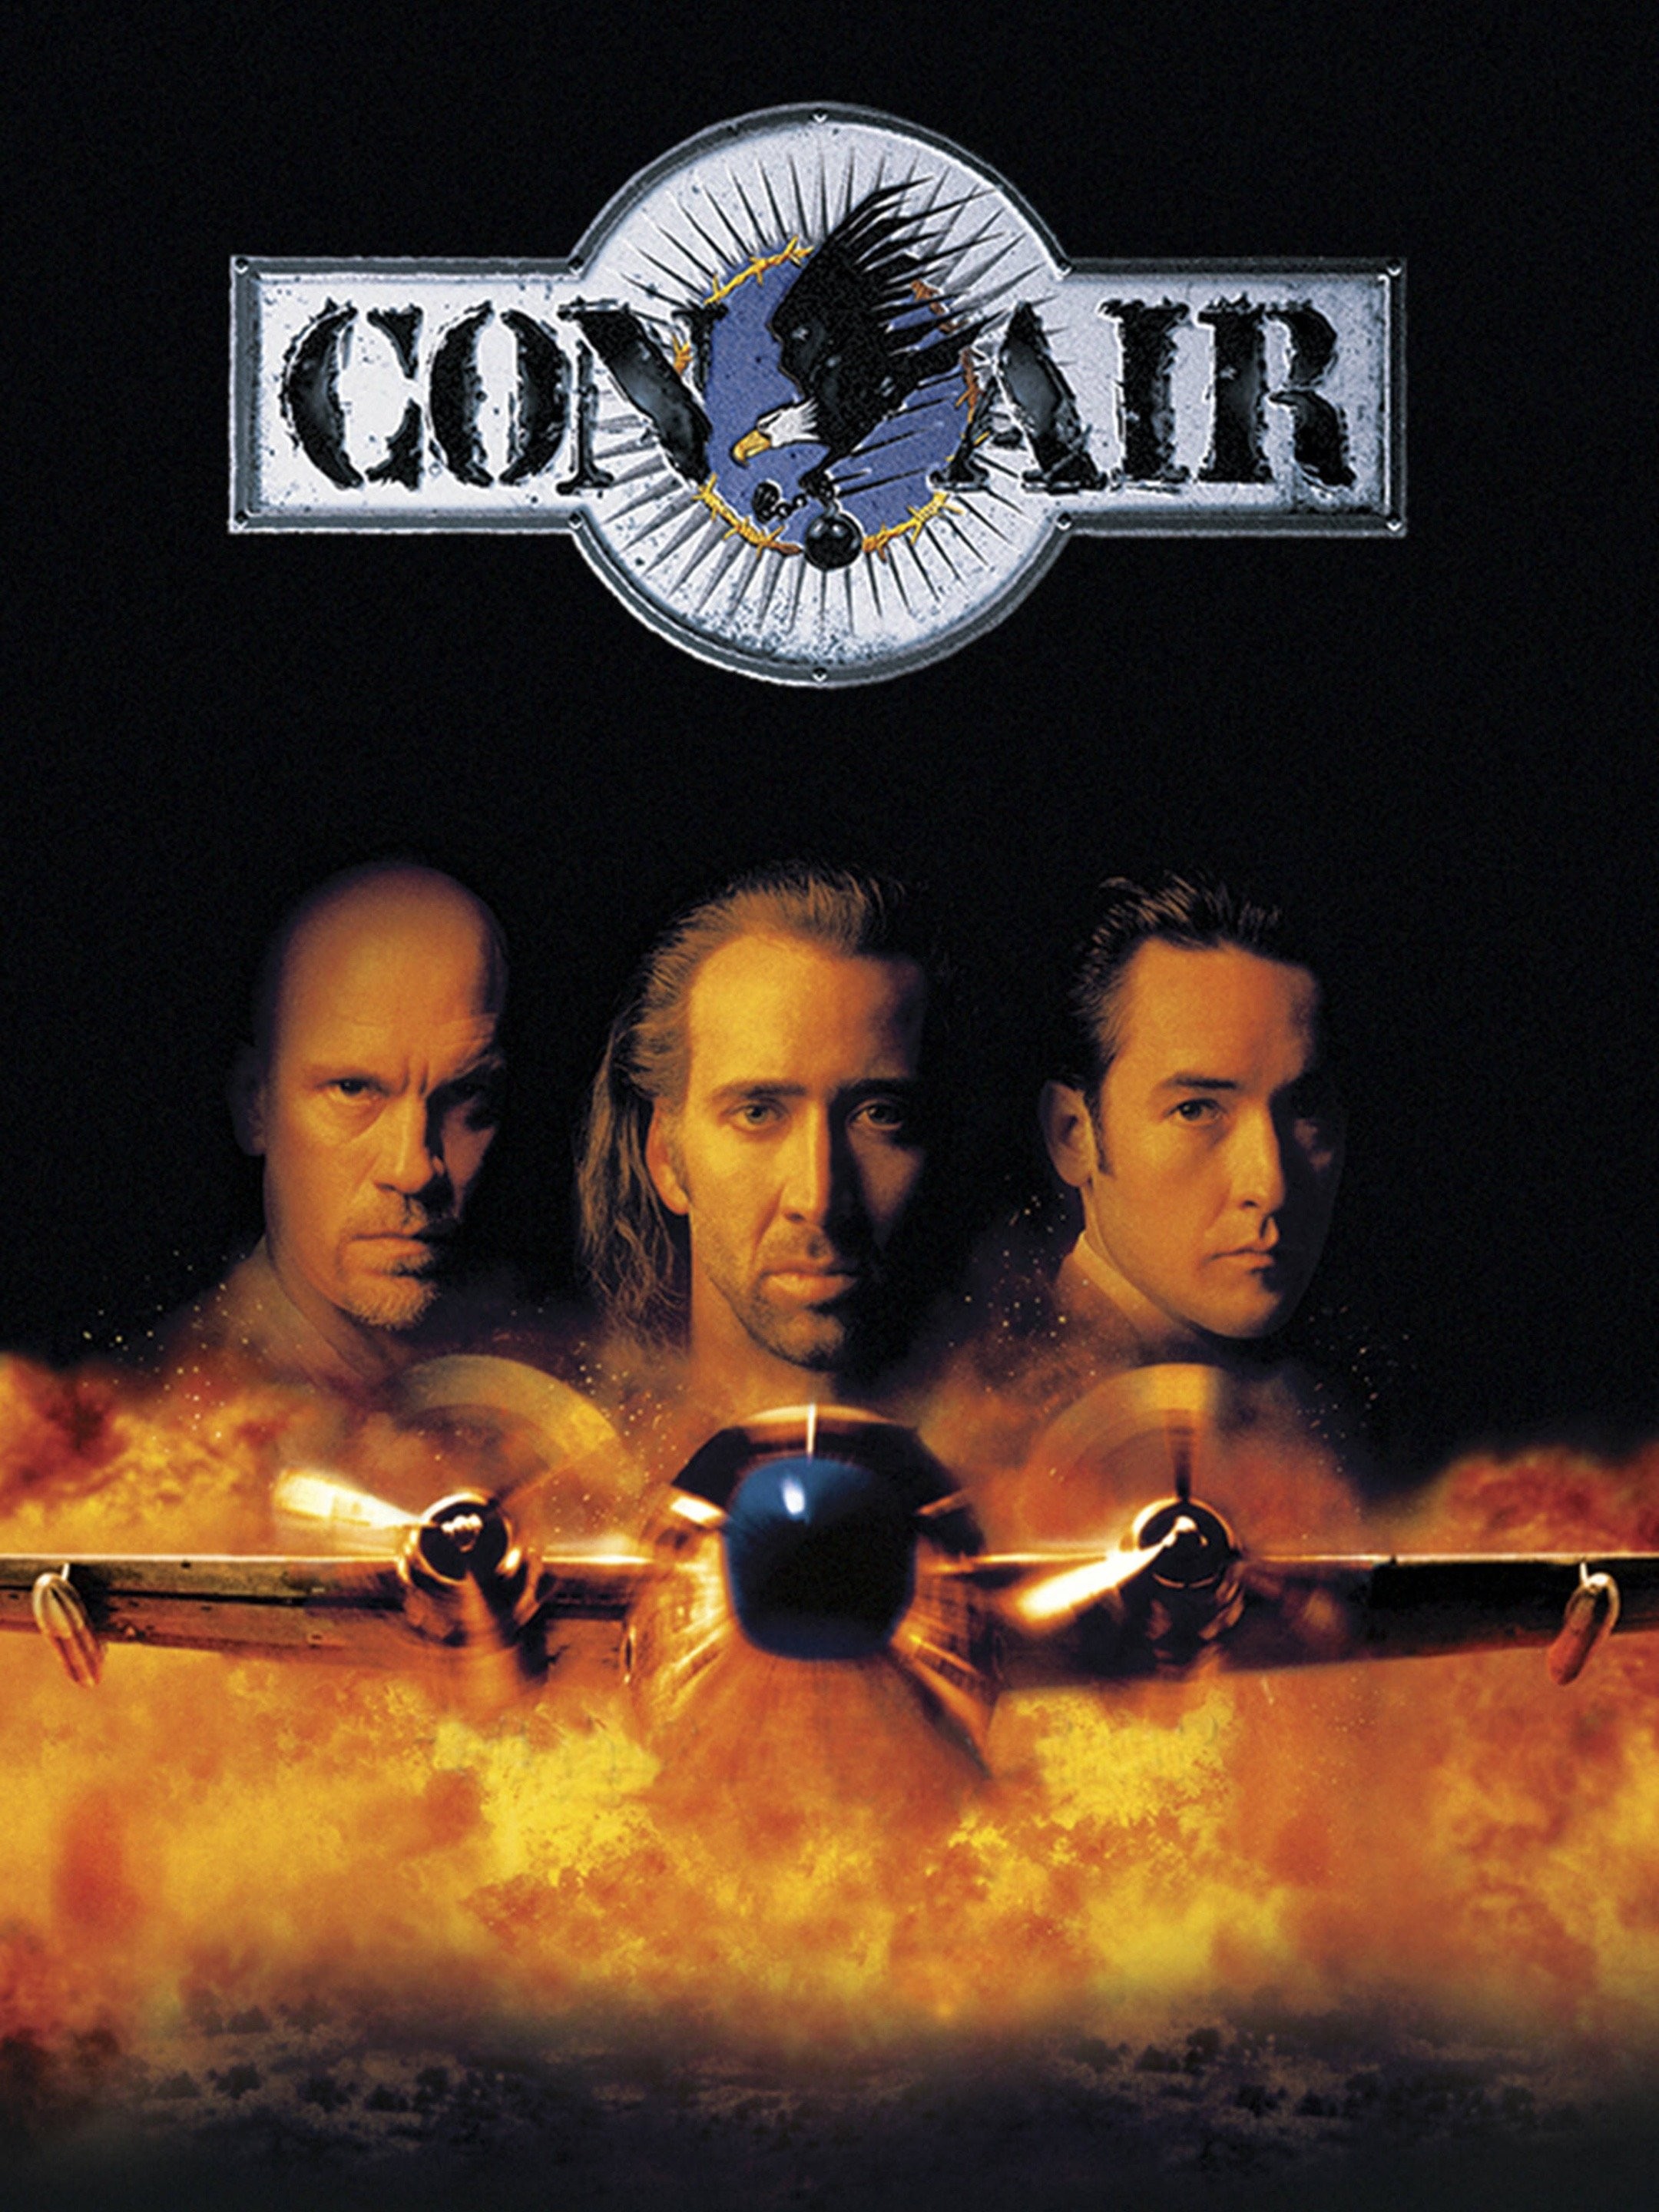 Nothing was too insane': is Con Air the strangest action film ever